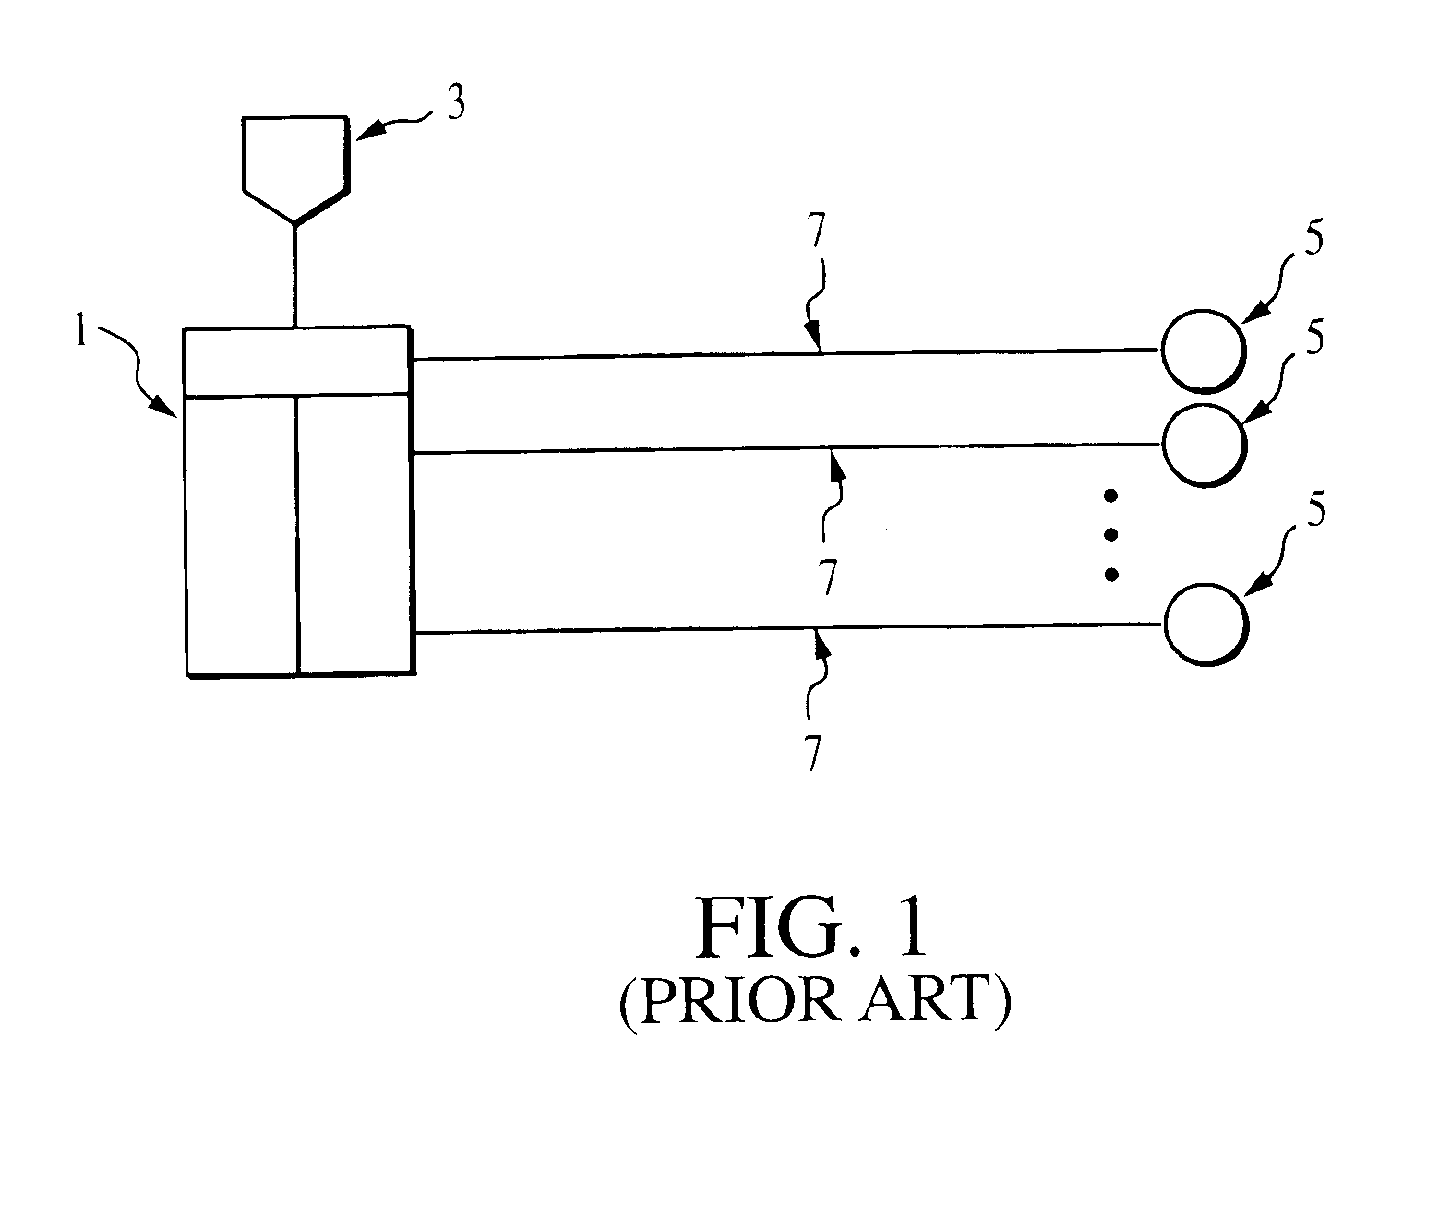 Distributed control network for irrigation management